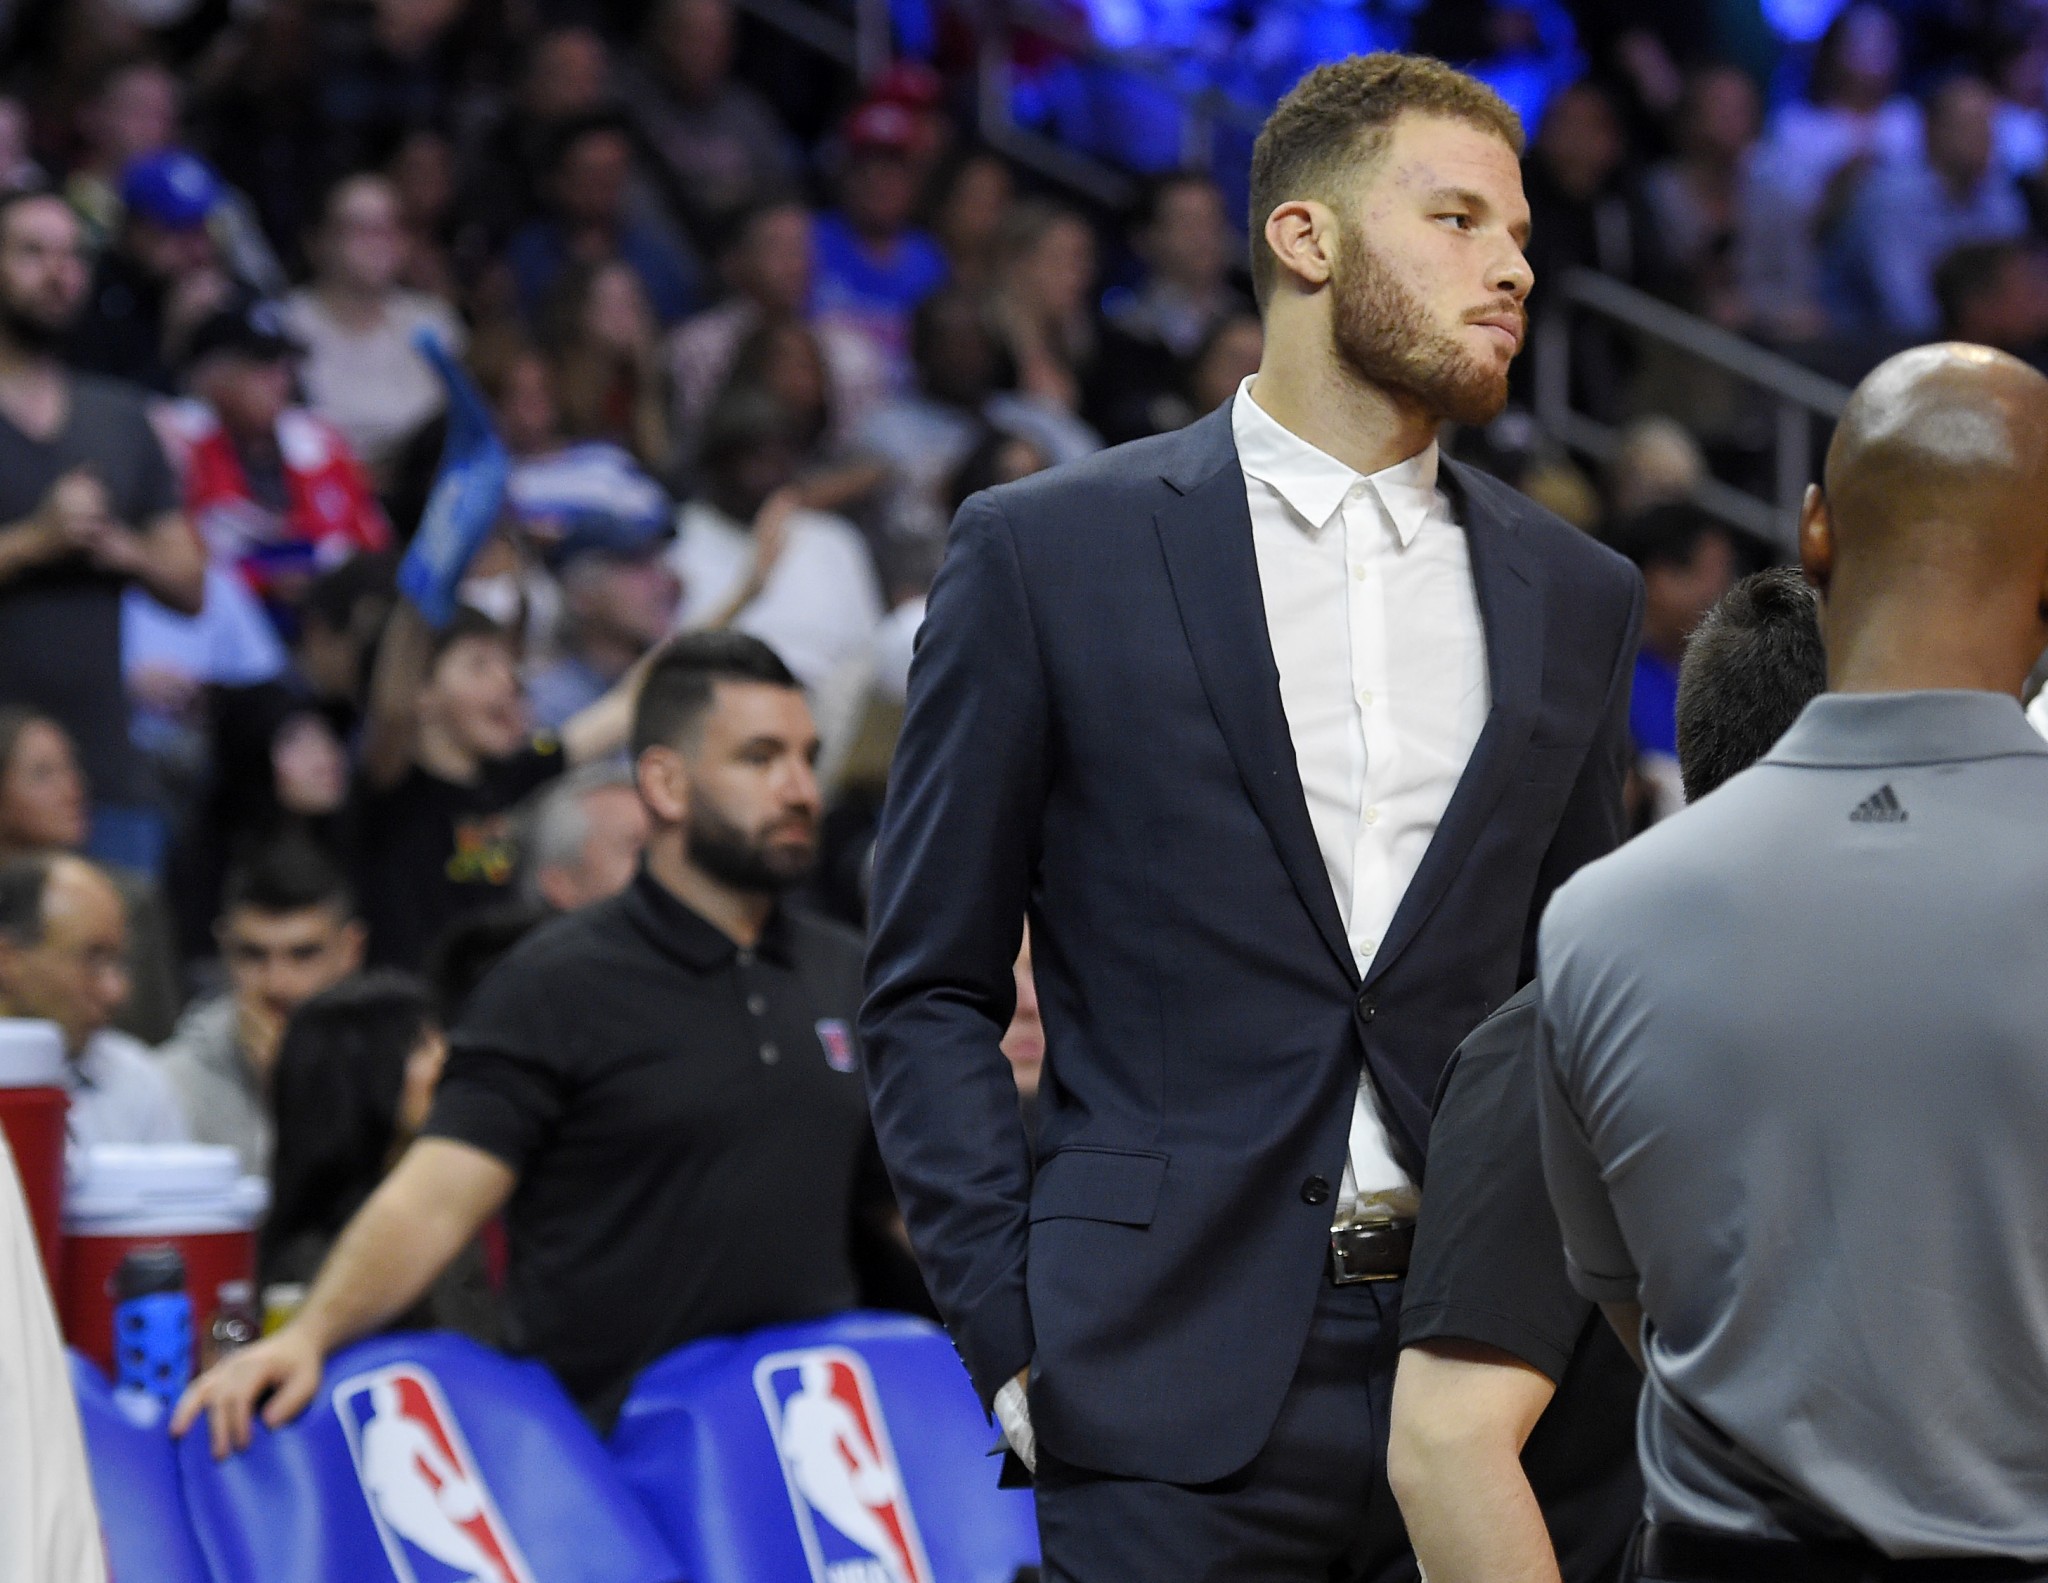 Blake Griffin stands on the court as Clippers equipment manager Matias Testi (left) stands behind the bench during a Feb. 18, 2016, game. (AP/Mark J. Terrill)